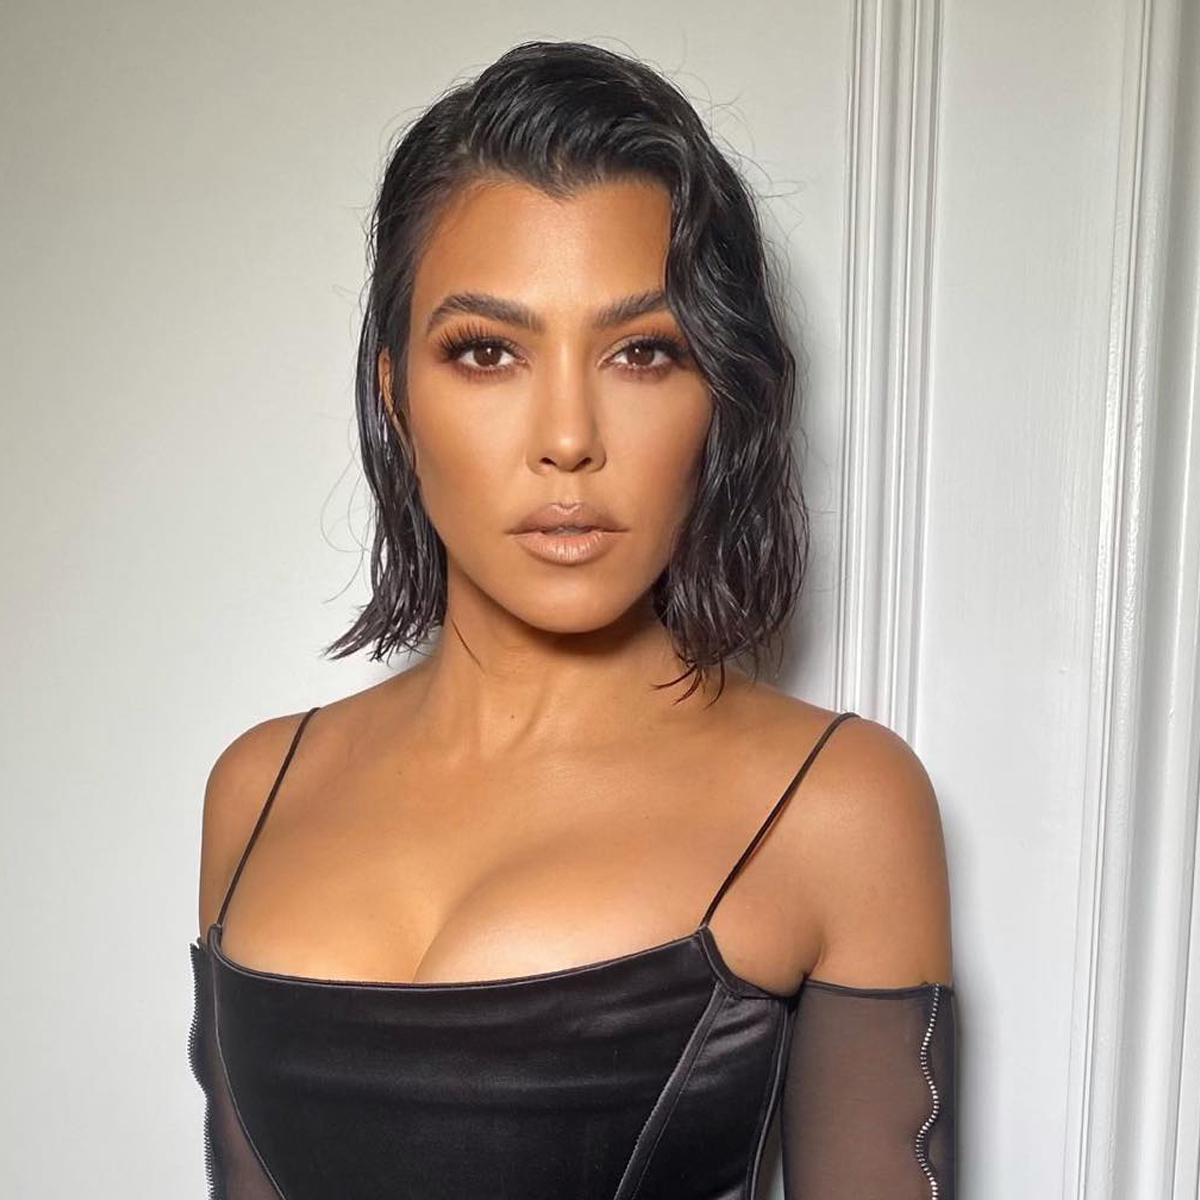 Kourtney Kardashian Claps Back at Critic Who Says She Used to Be “So Classy” – E! Online